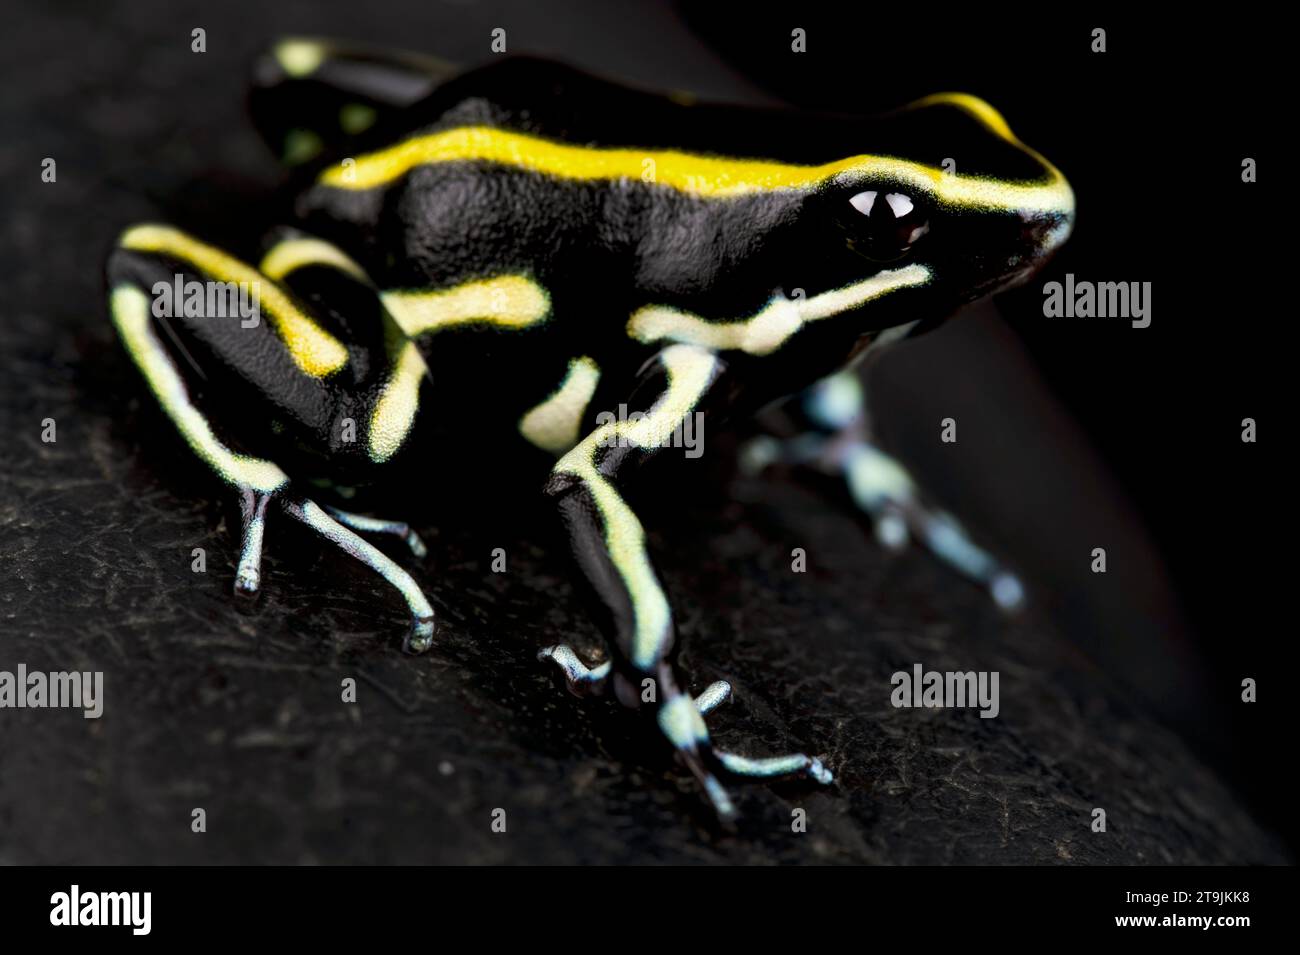 The Yellow-striped dart frog (Dendrobates truncatus) is a beautiful amphibian from Colombia. Stock Photo